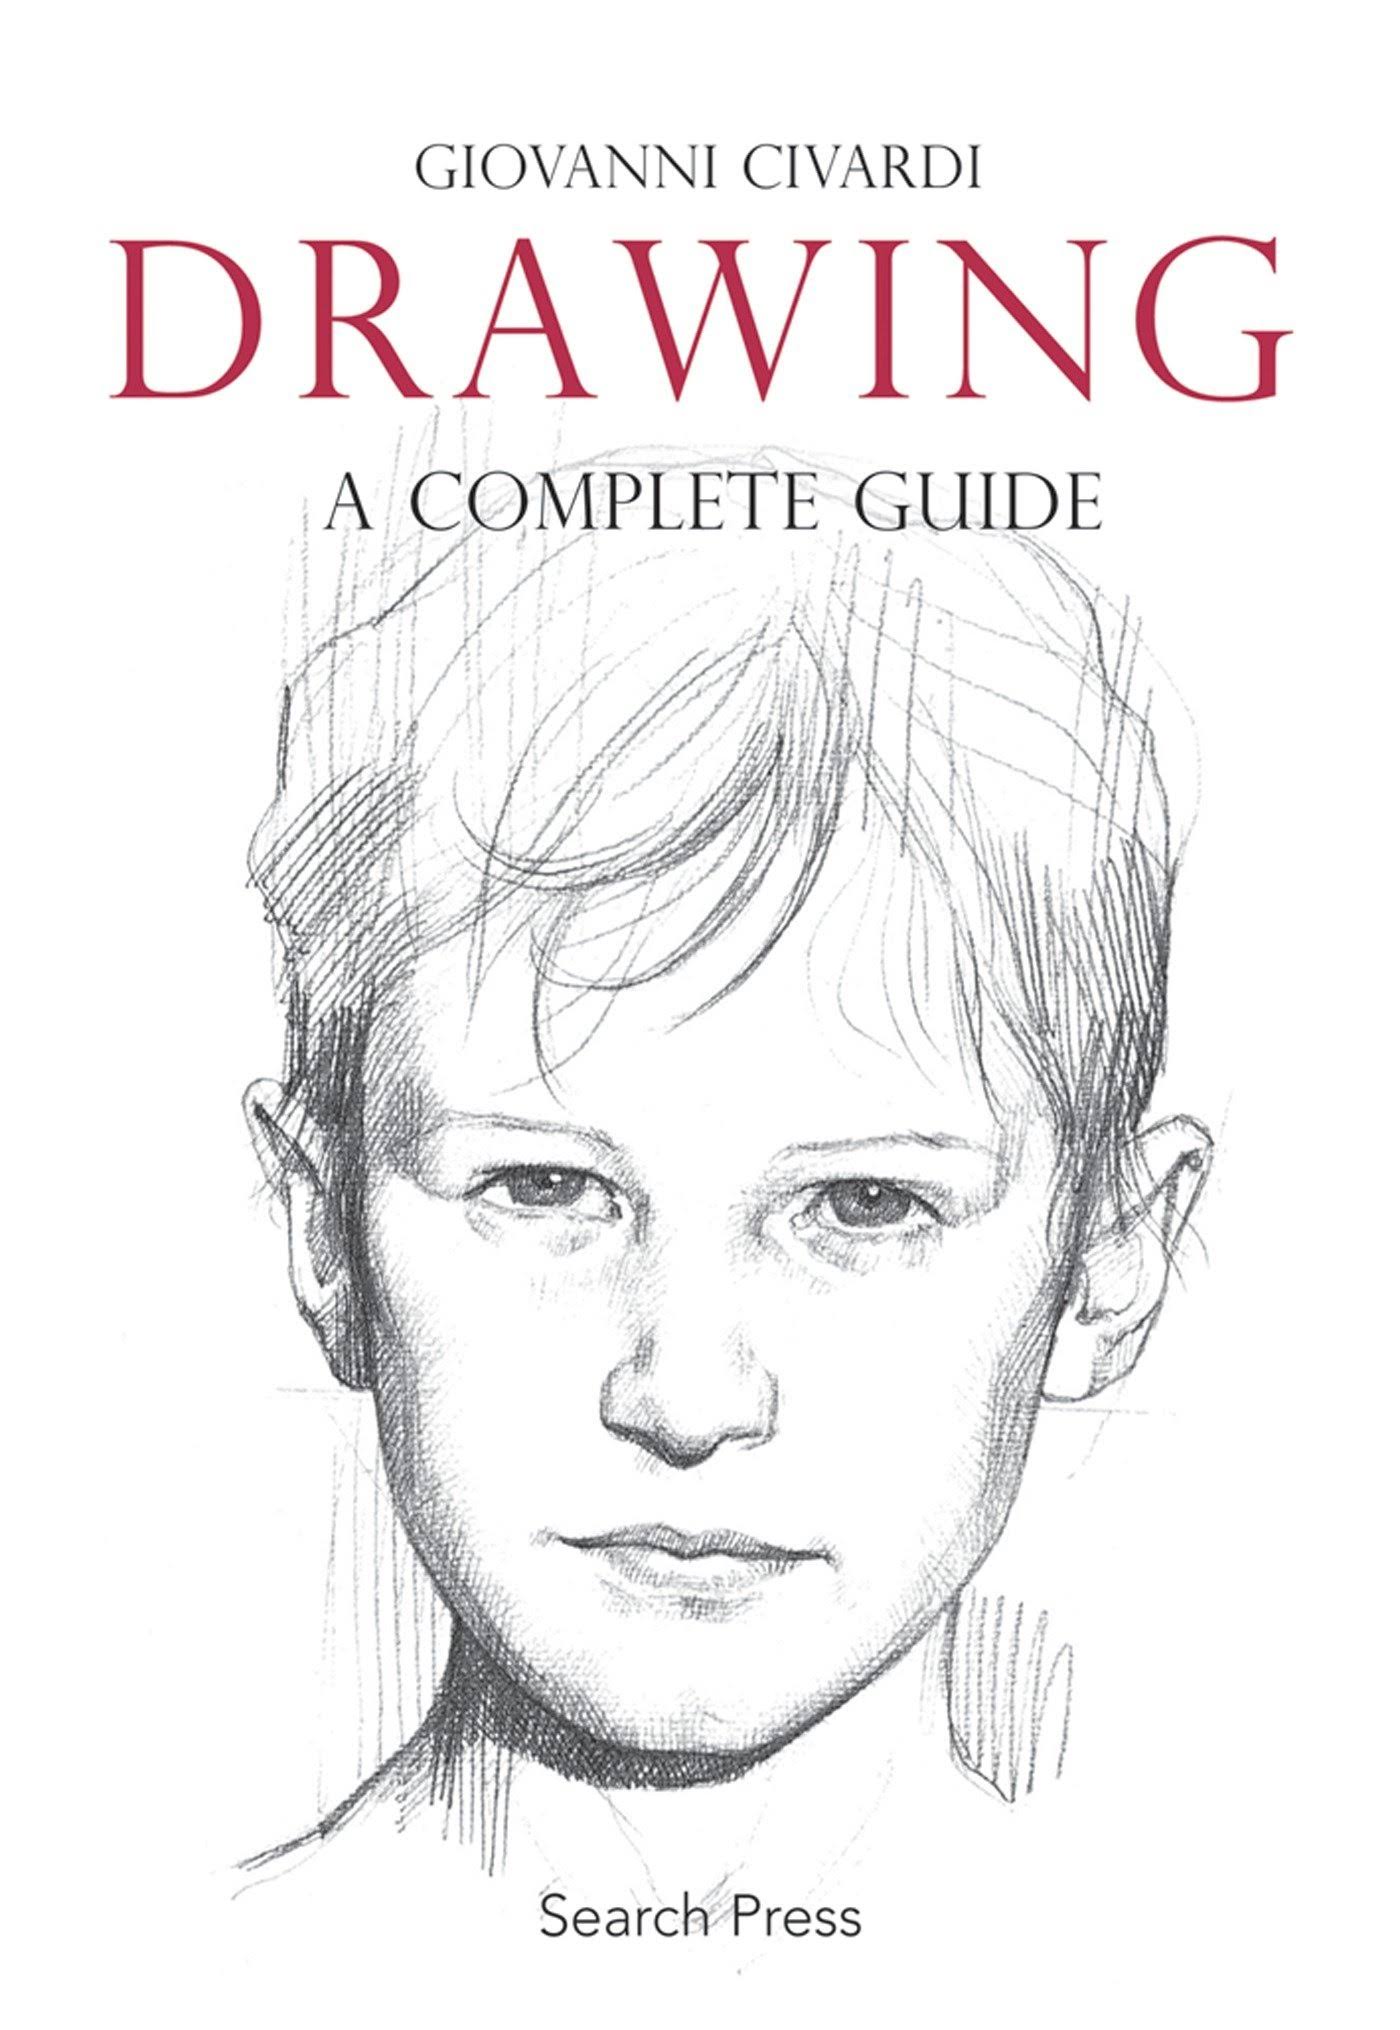 Drawing: A Complete Guide [Book]